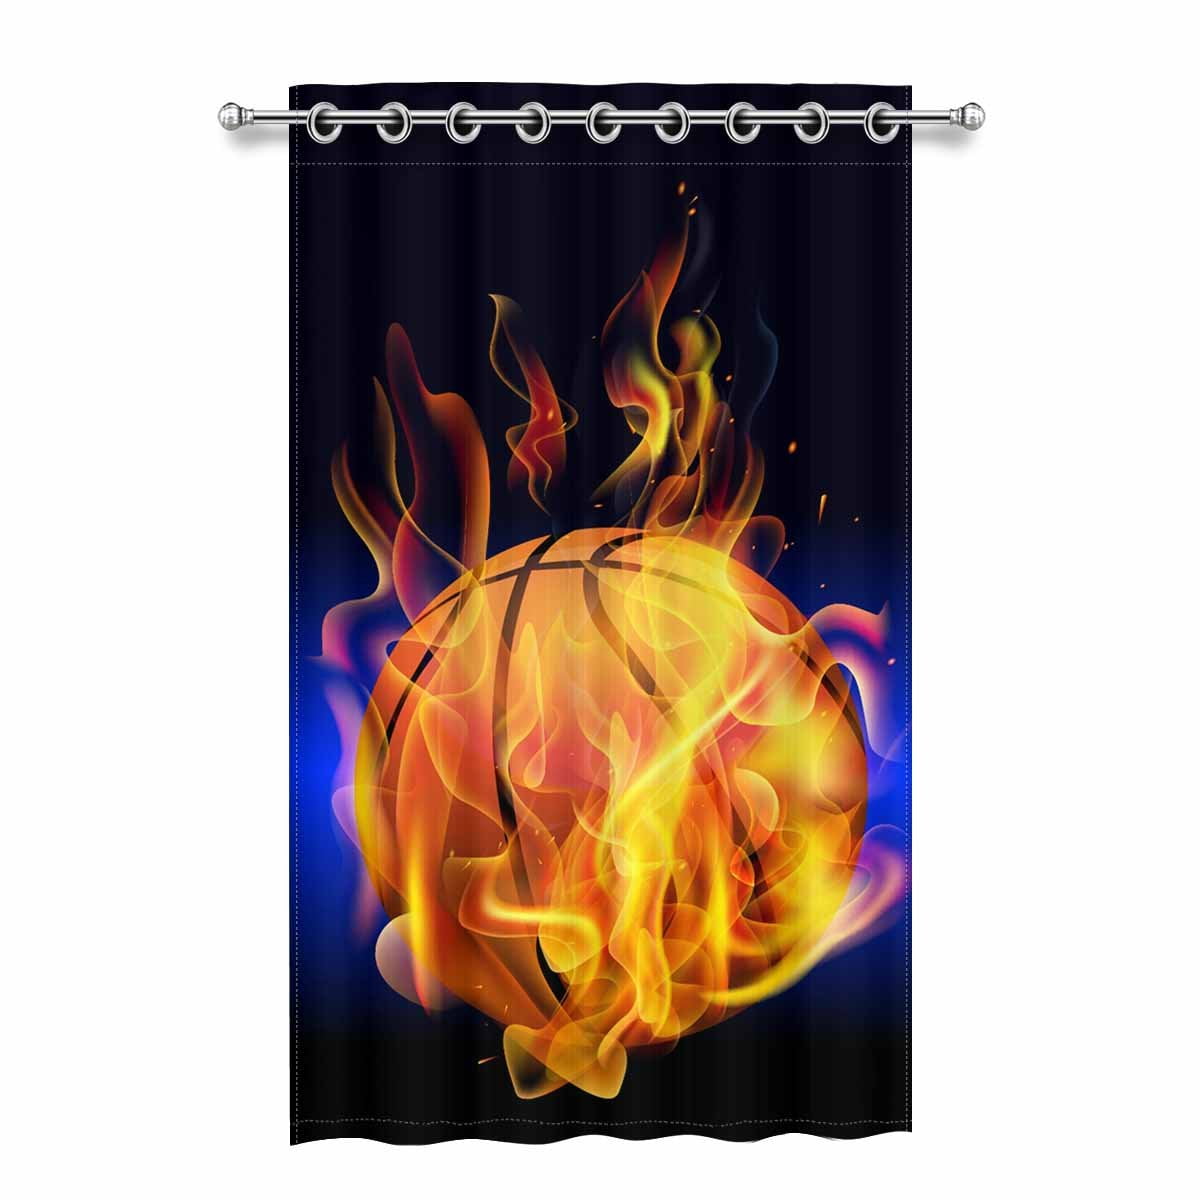 Home Decor Blackout Curtains Basketball Never Stops Polyester Window Curtain 